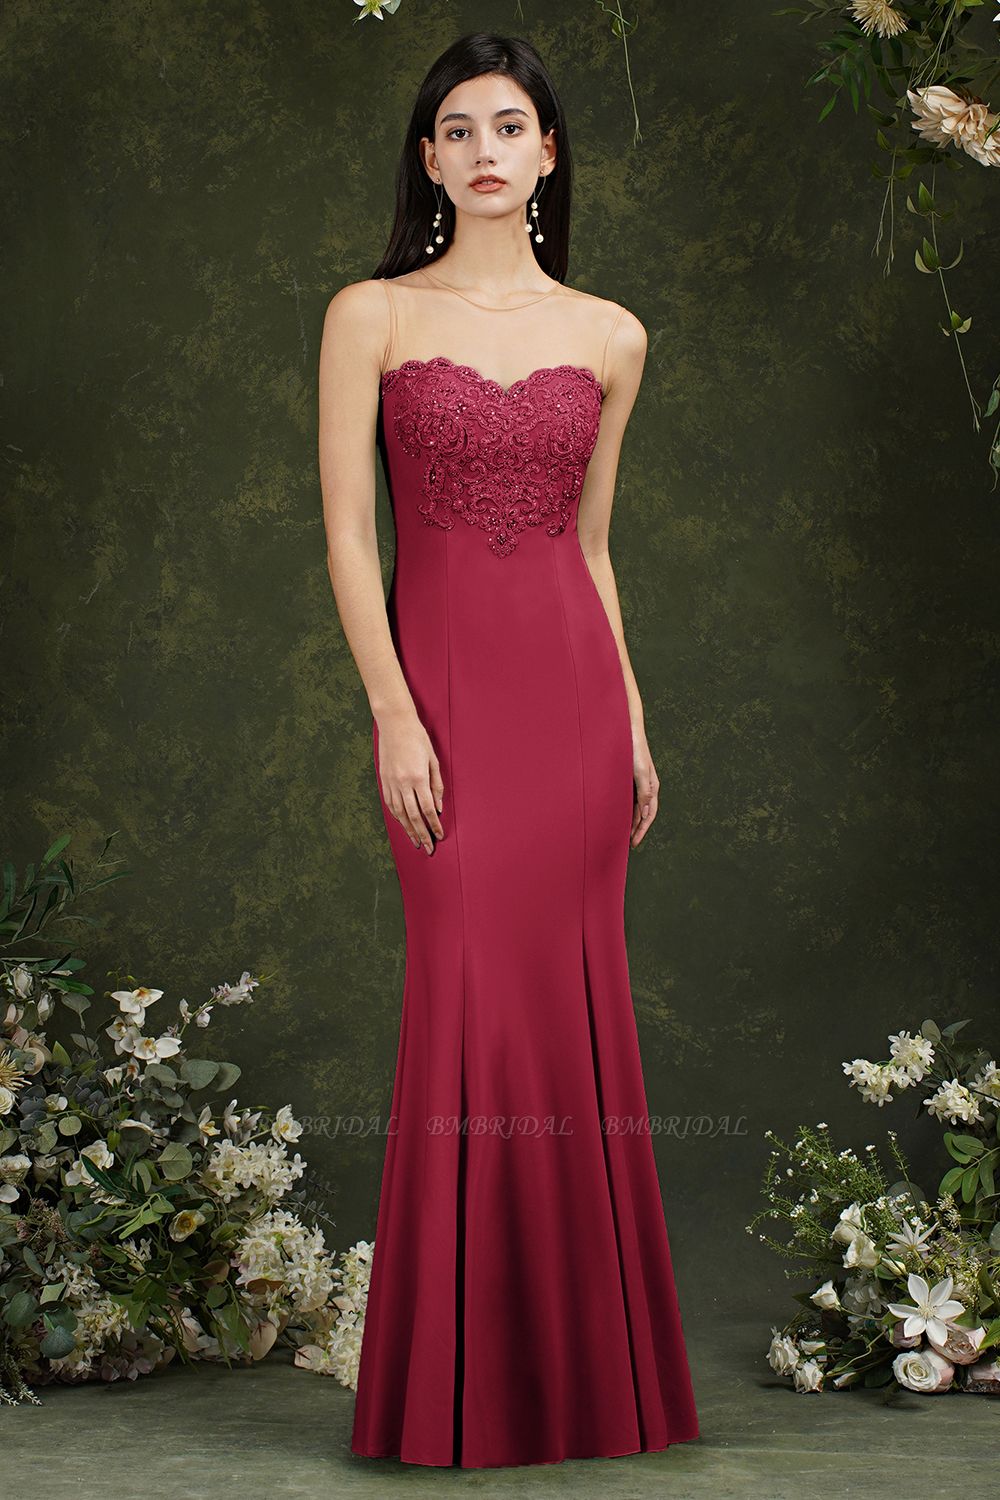 Bmbridal Burgundy Illussion Neck Mermaid Prom Dress Long With Appliques